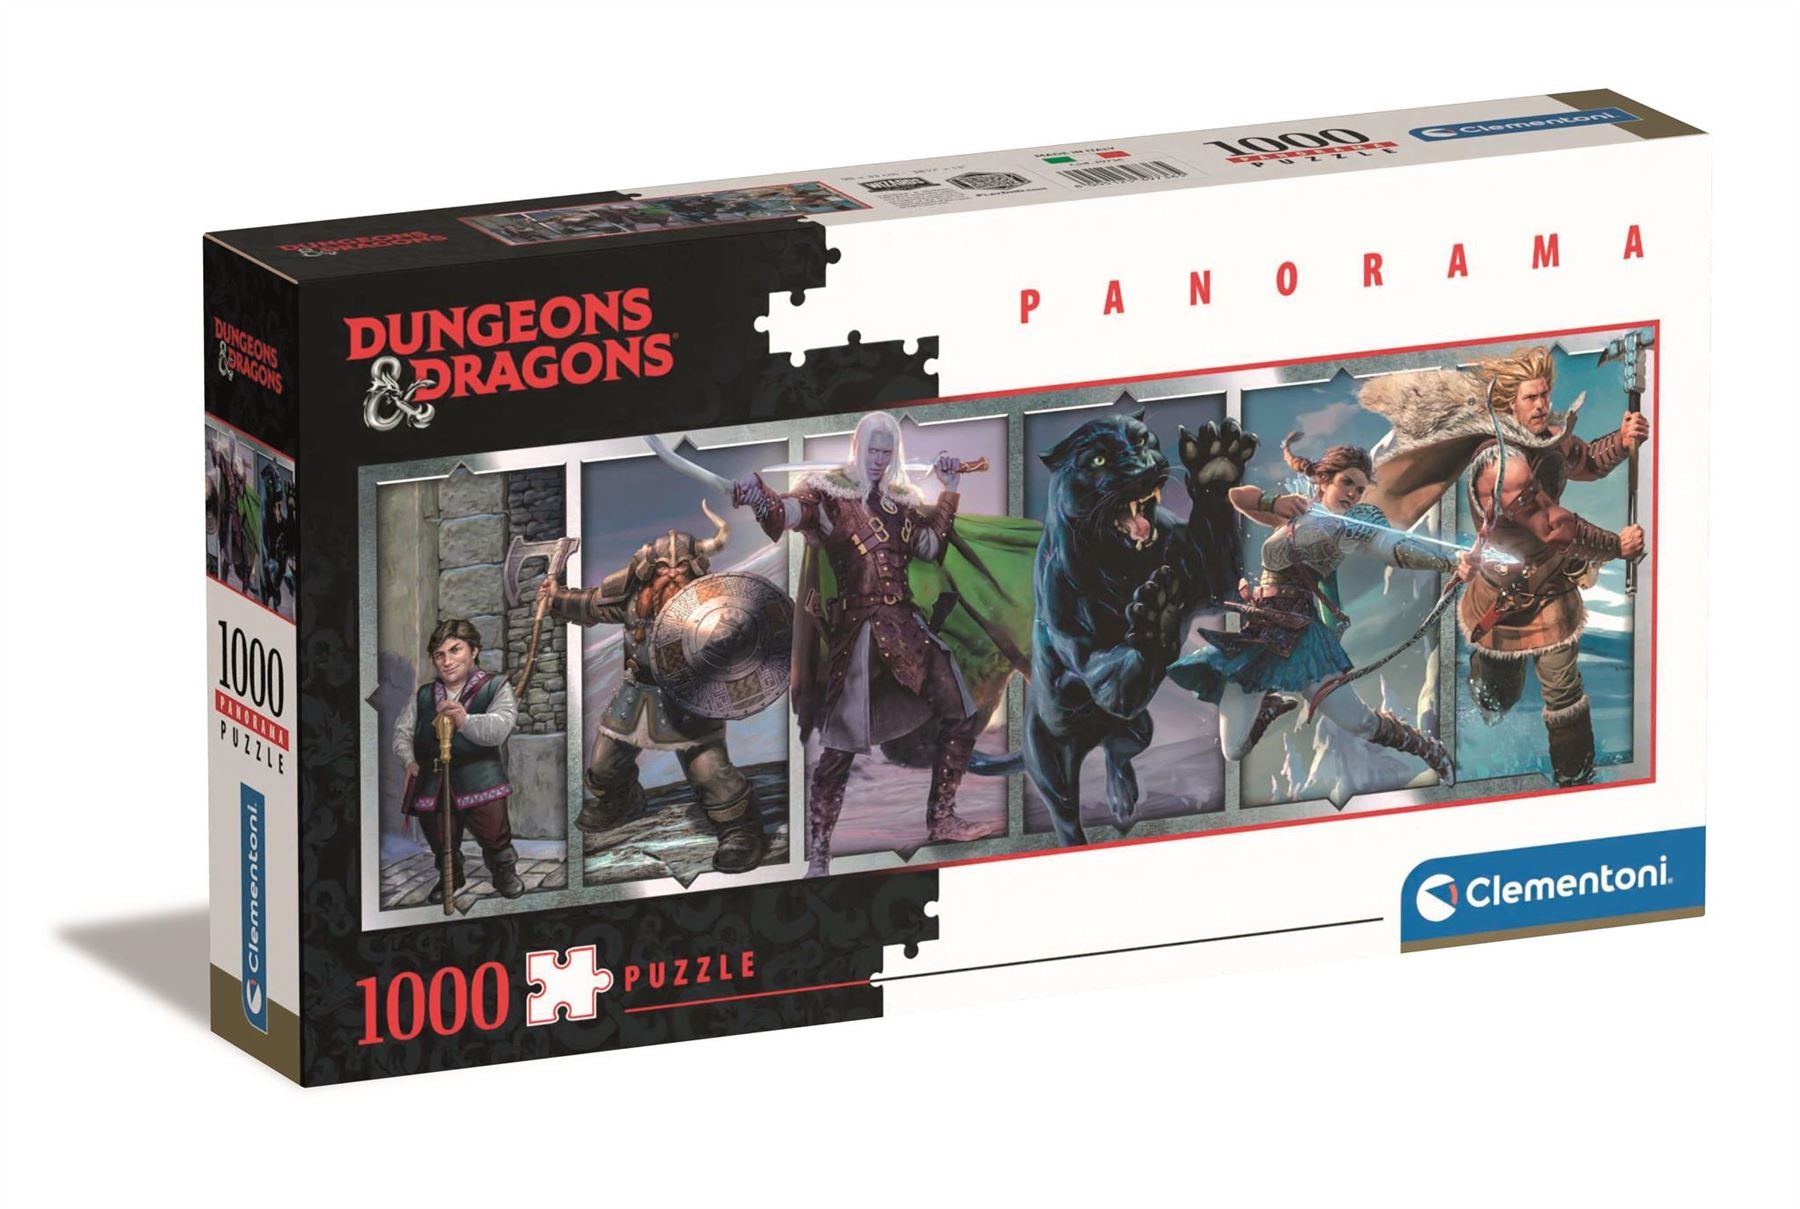 Dungeons and Dragons Panorama Jigsaw Puzzle 1000 Pieces